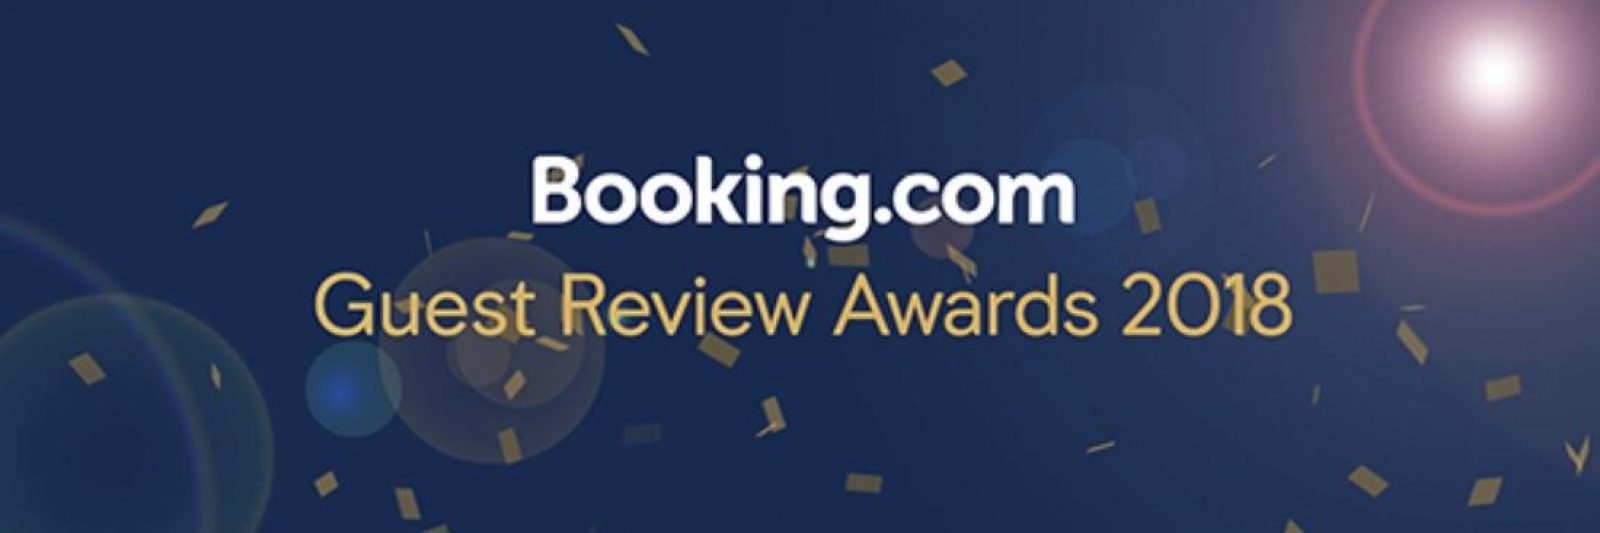 Guest Review Award Booking